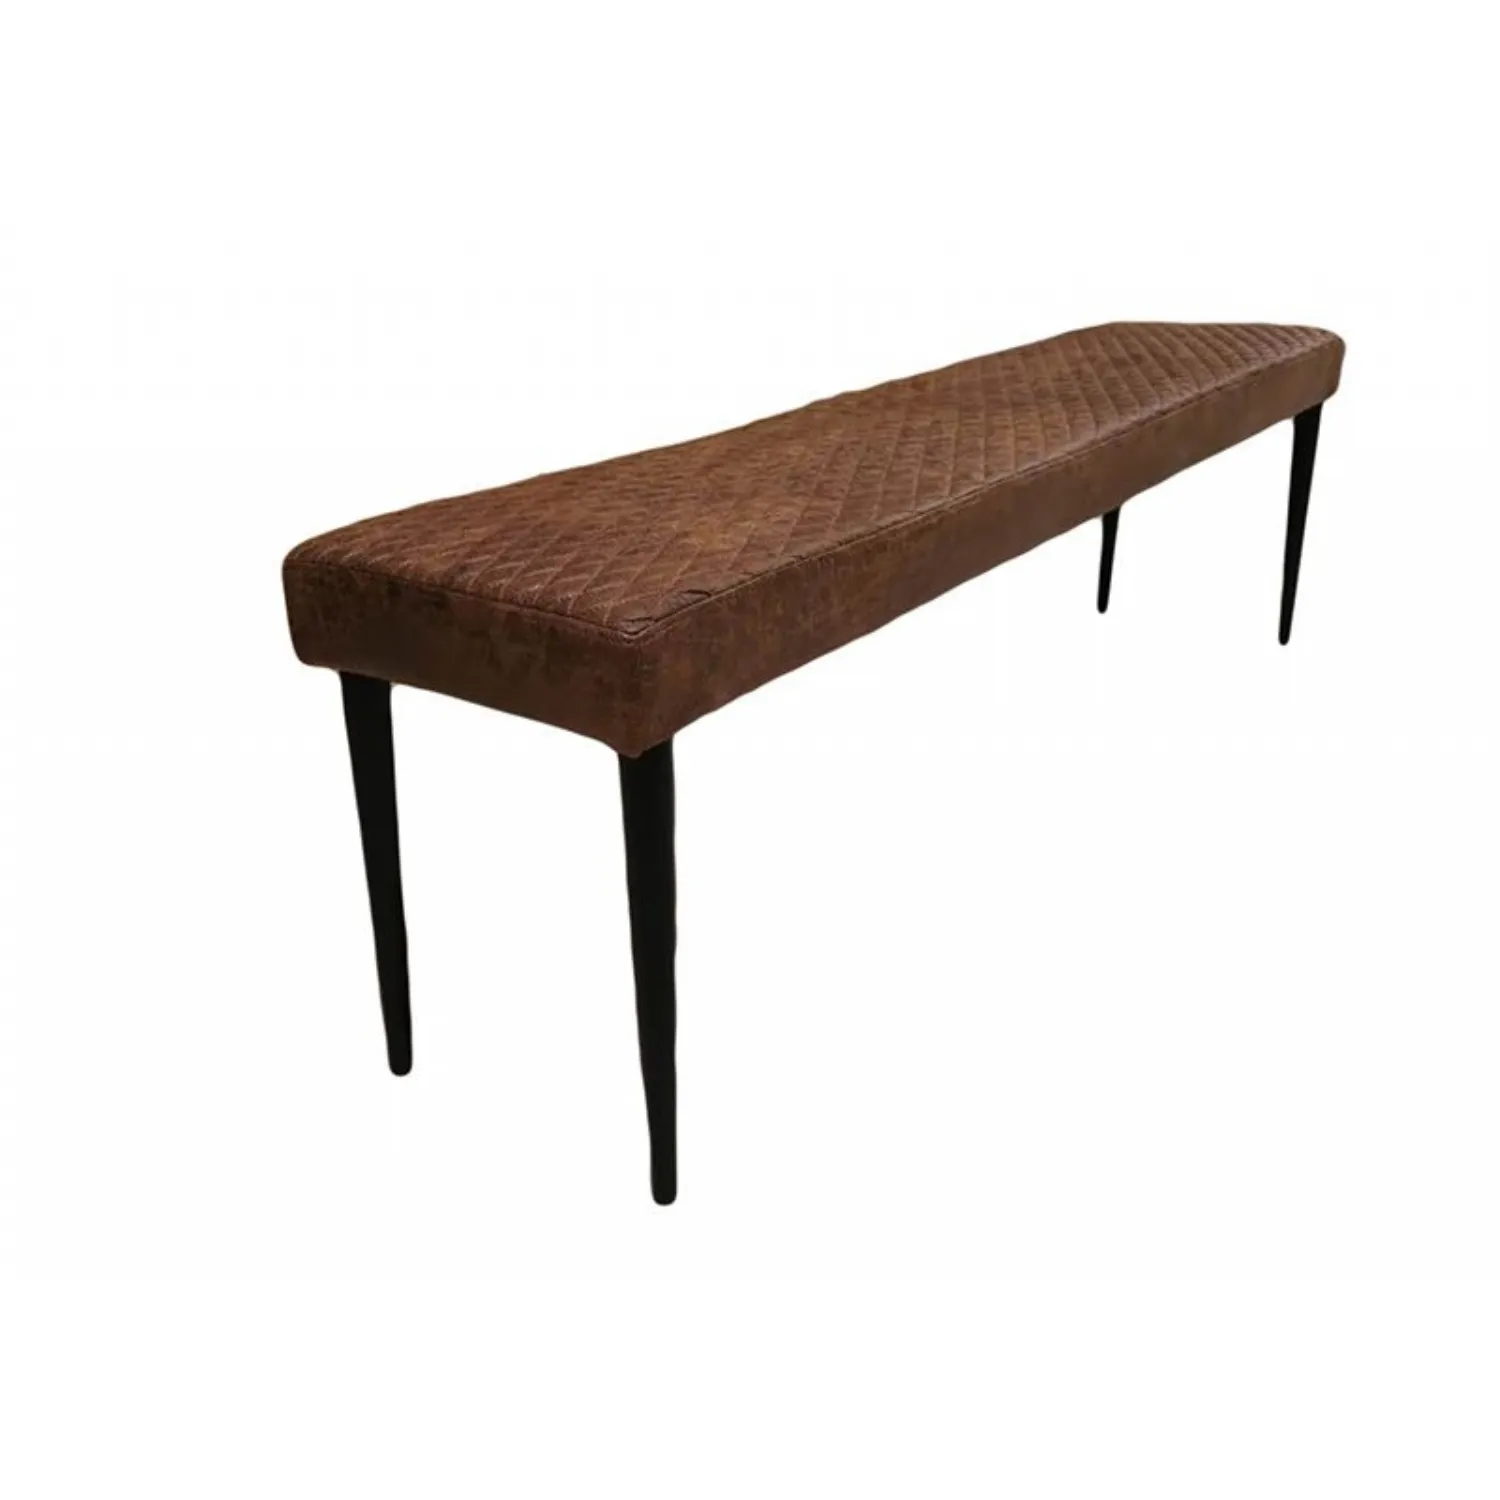 Tan Brown Diamond Stitched Leather Dining Bench Black Legs